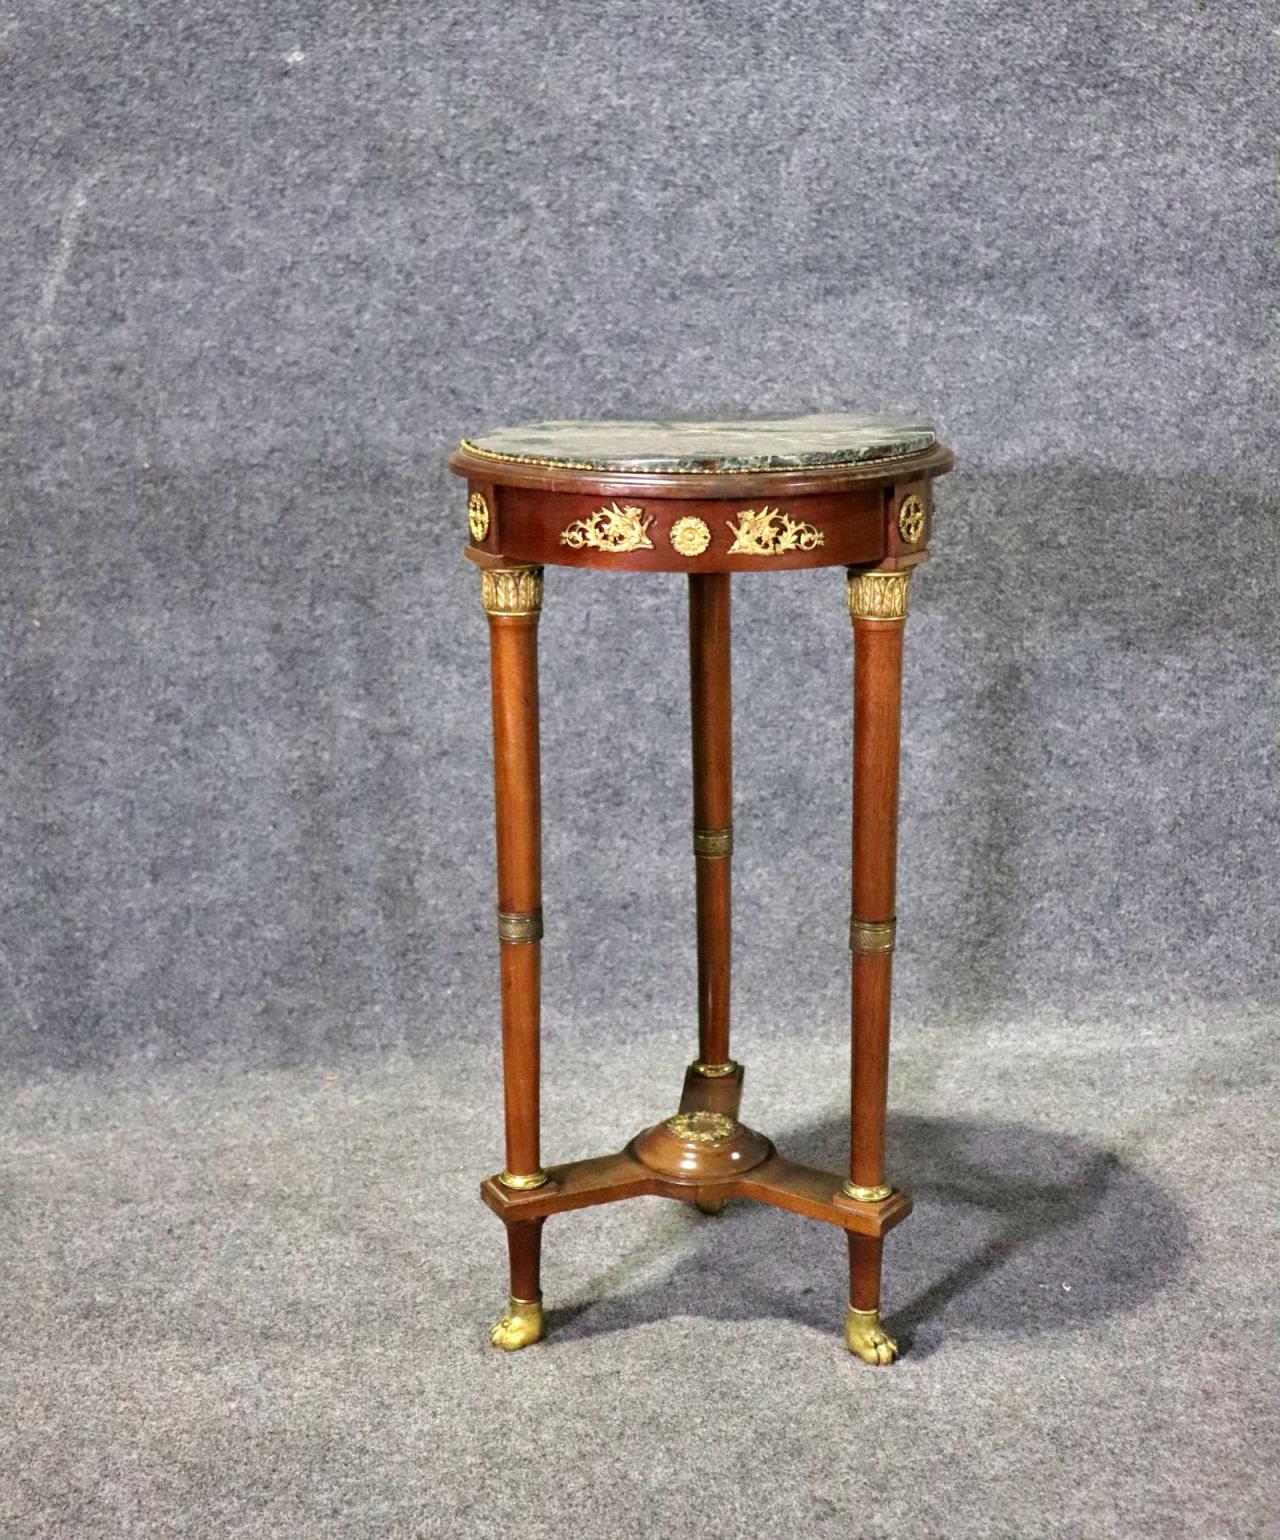 Brass Antique Verdi Green Marble Top French Empire Pedestal End Table Circa 1870 For Sale